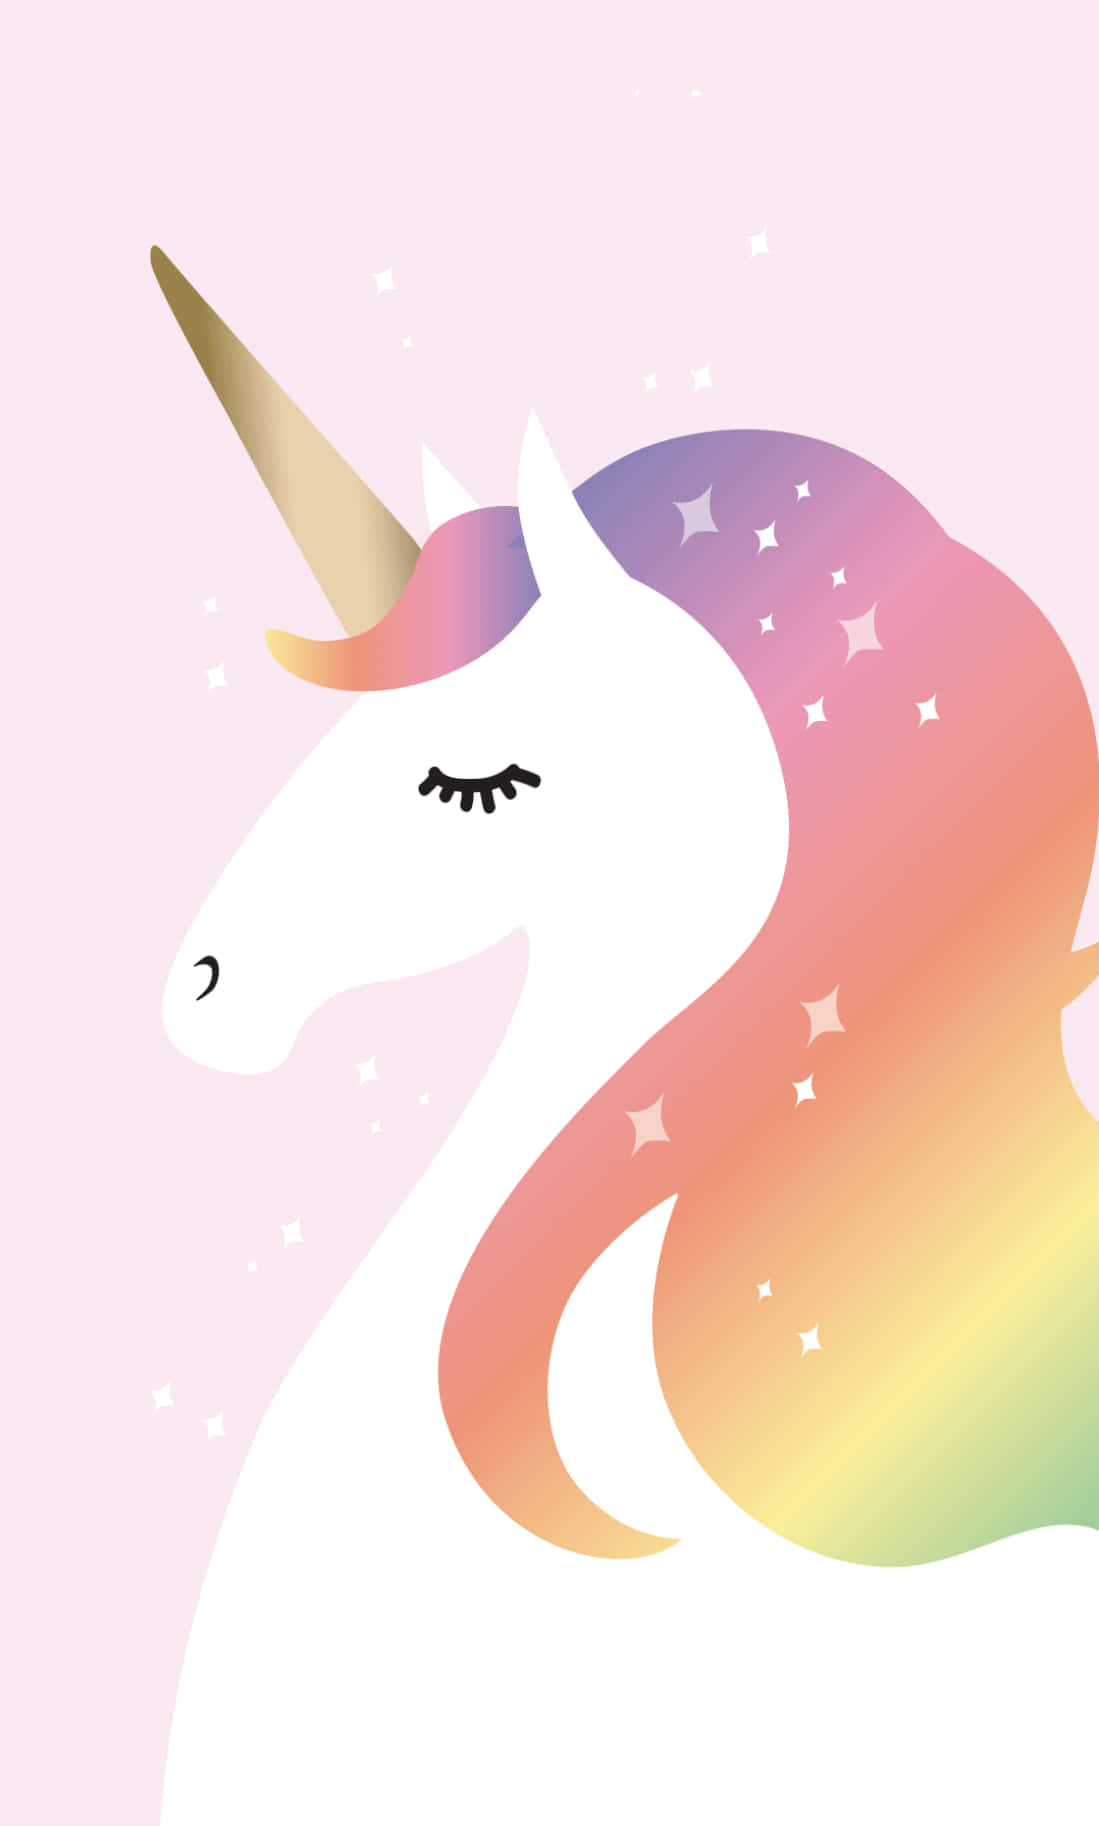 Envision Magic with this Iphone Unicorn Wallpaper